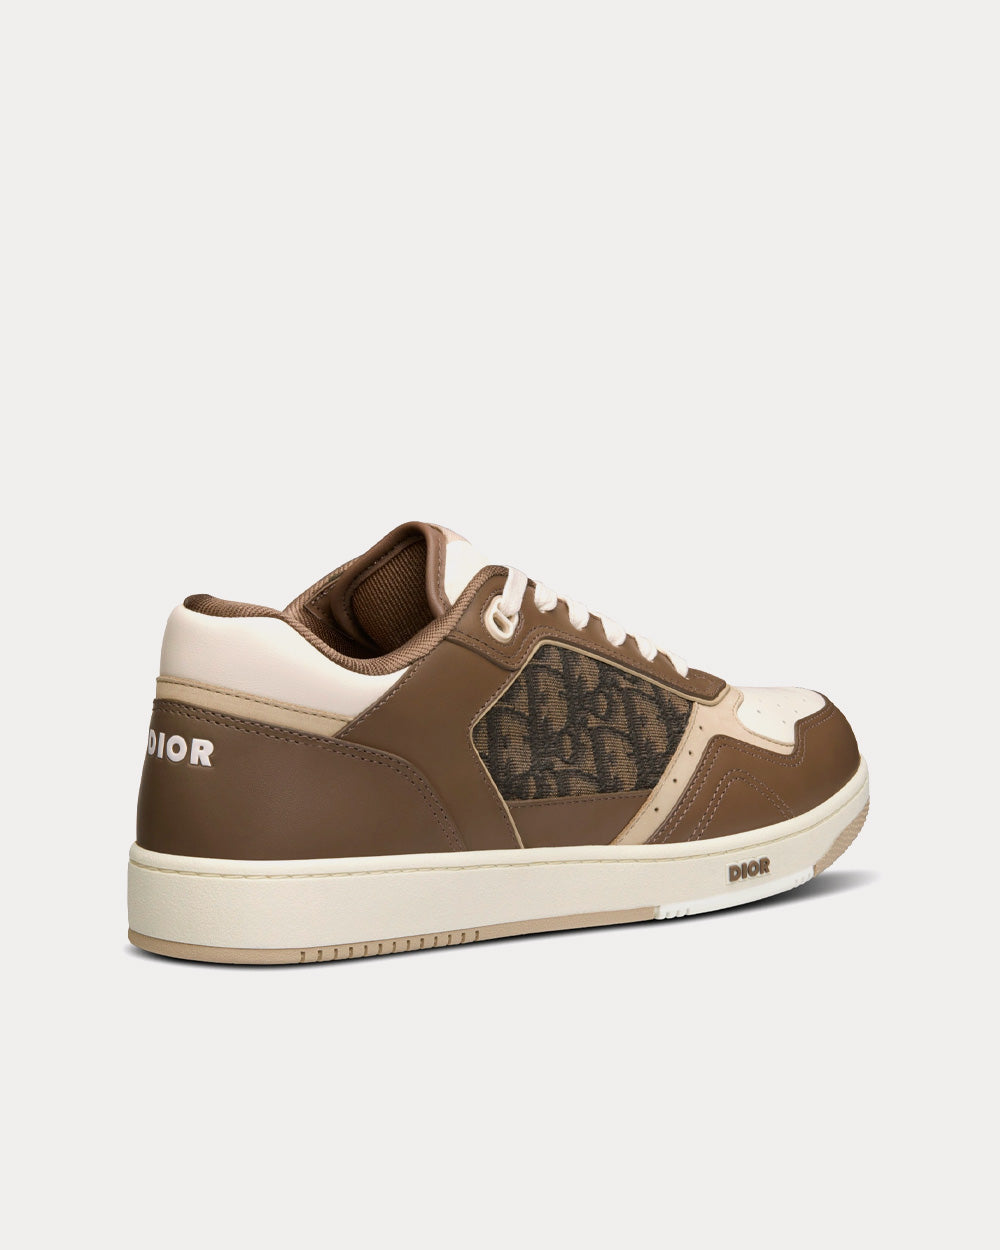 Dior - B27 Ebony, Cream and White Smooth Calfskin with Ebony and Black Dior Oblique Jacquard Low Top Sneakers